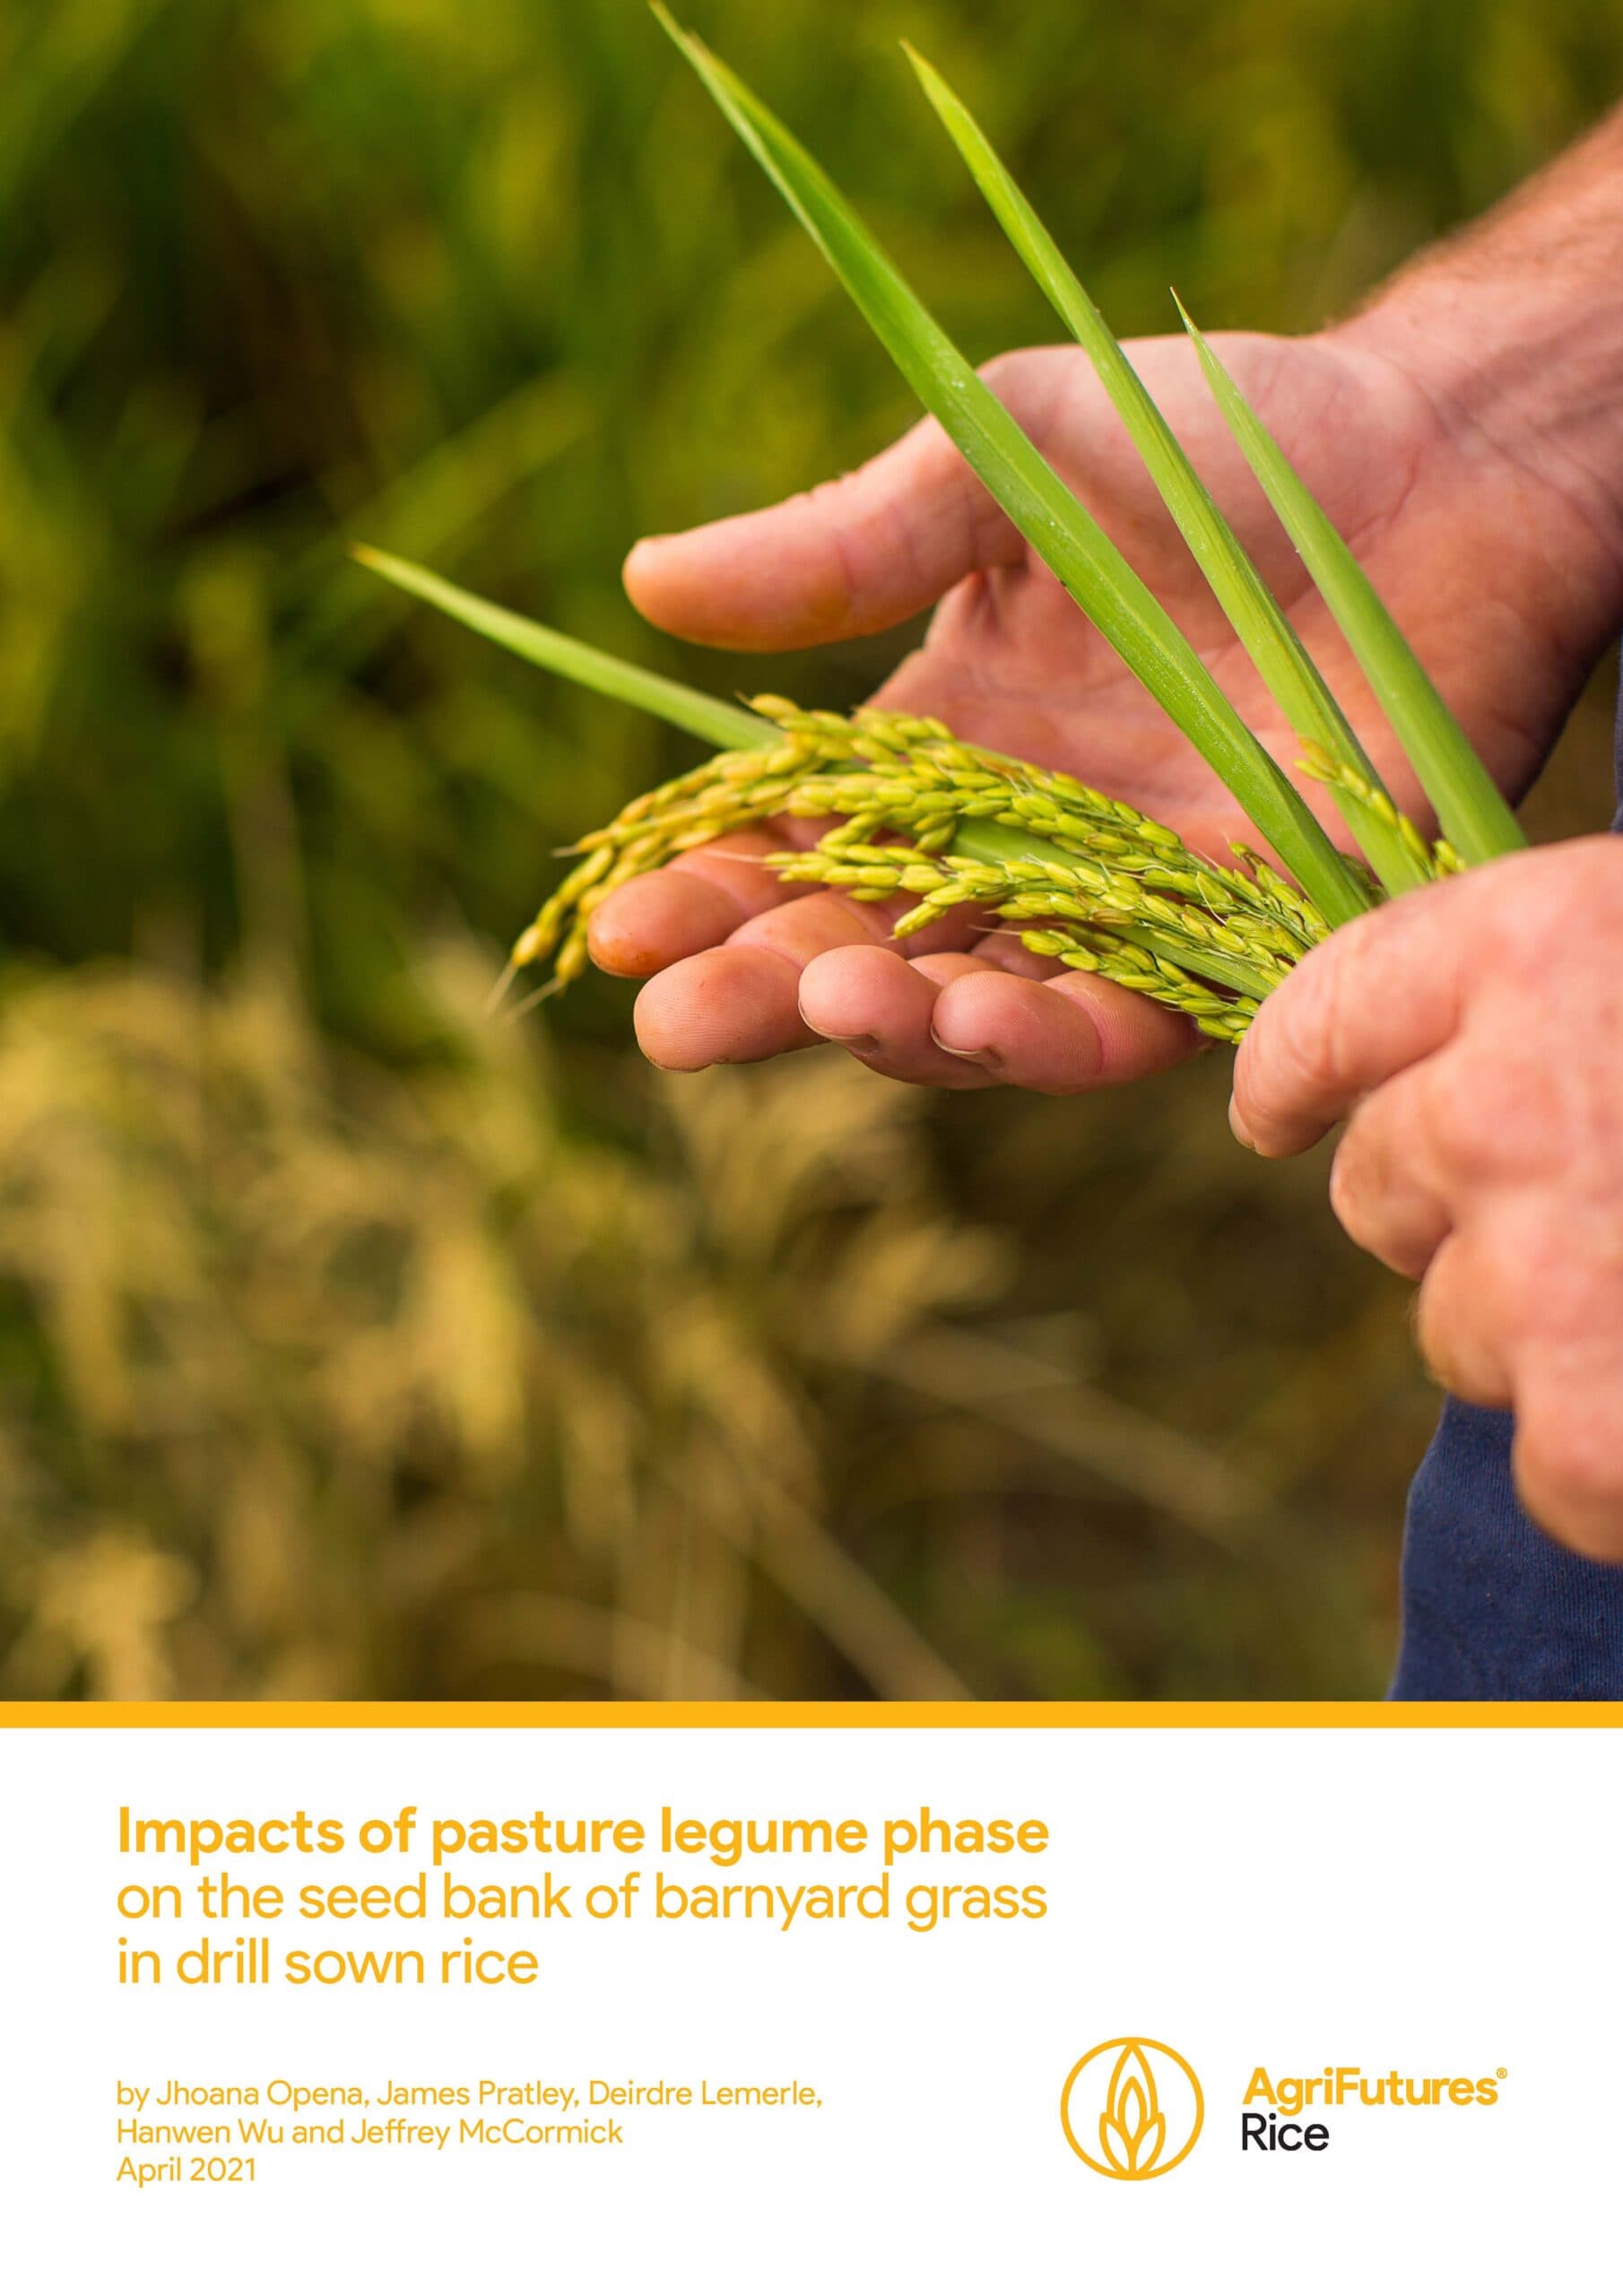 Impacts of pasture legume phase on the seed bank of barnyard grass in drill sown rice - image